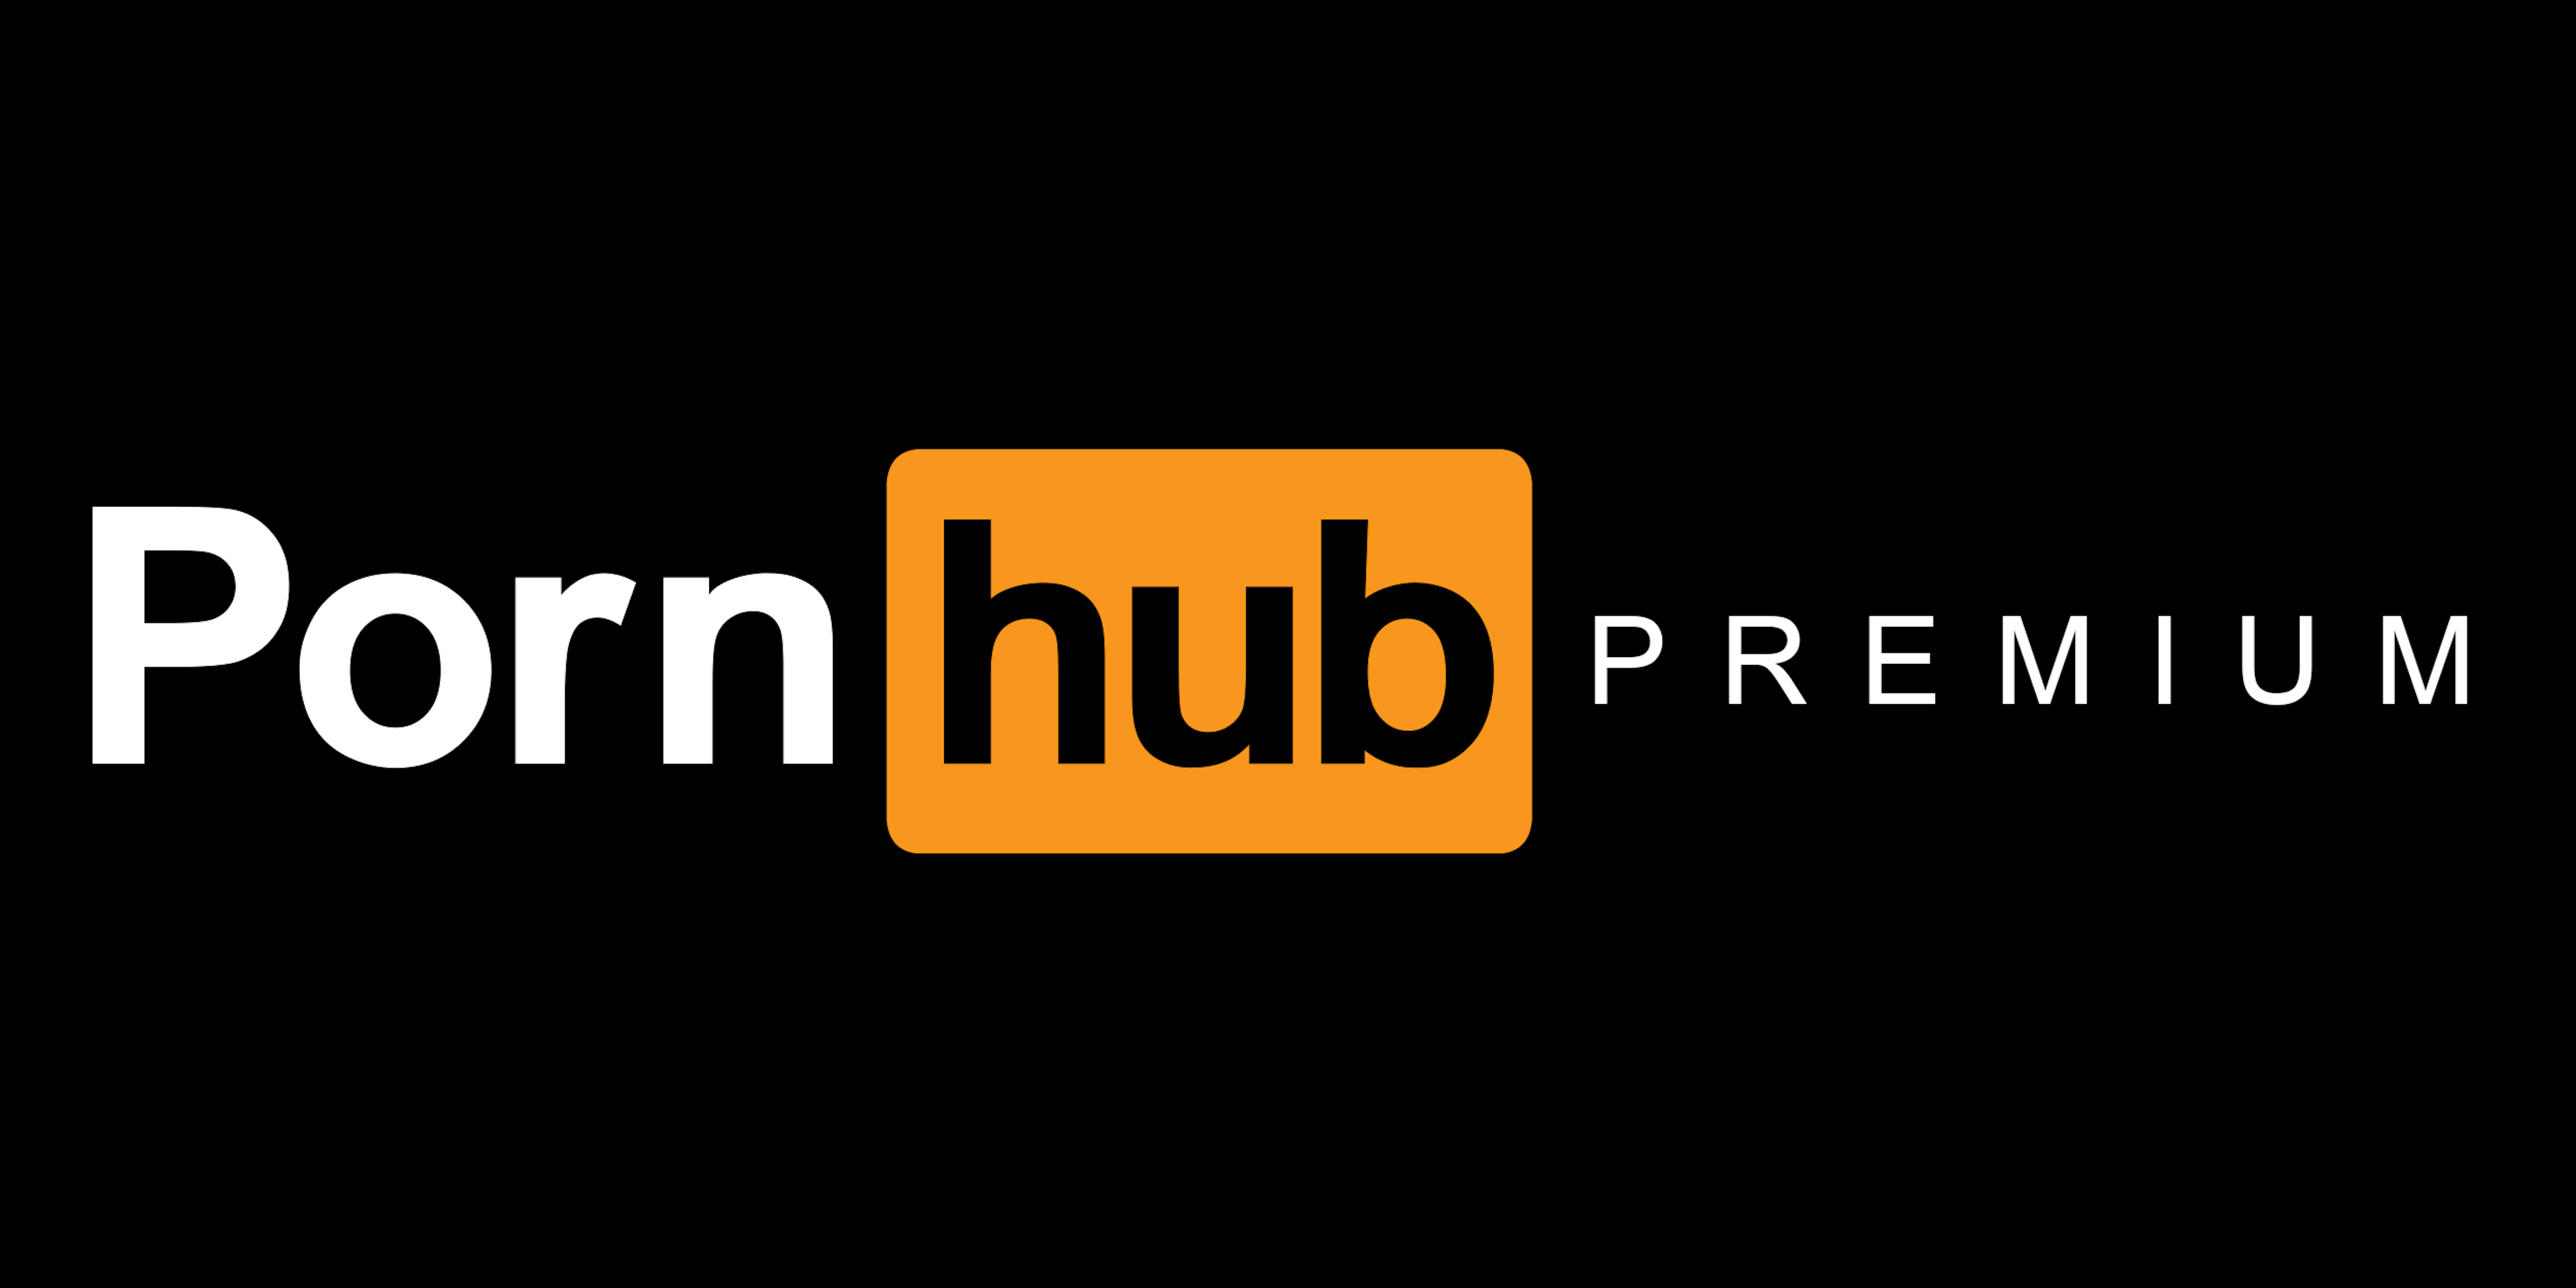 Box Of Pron Com - Is Pornhub Premium Worth It? Cost, Features, and Unexpected Benefits